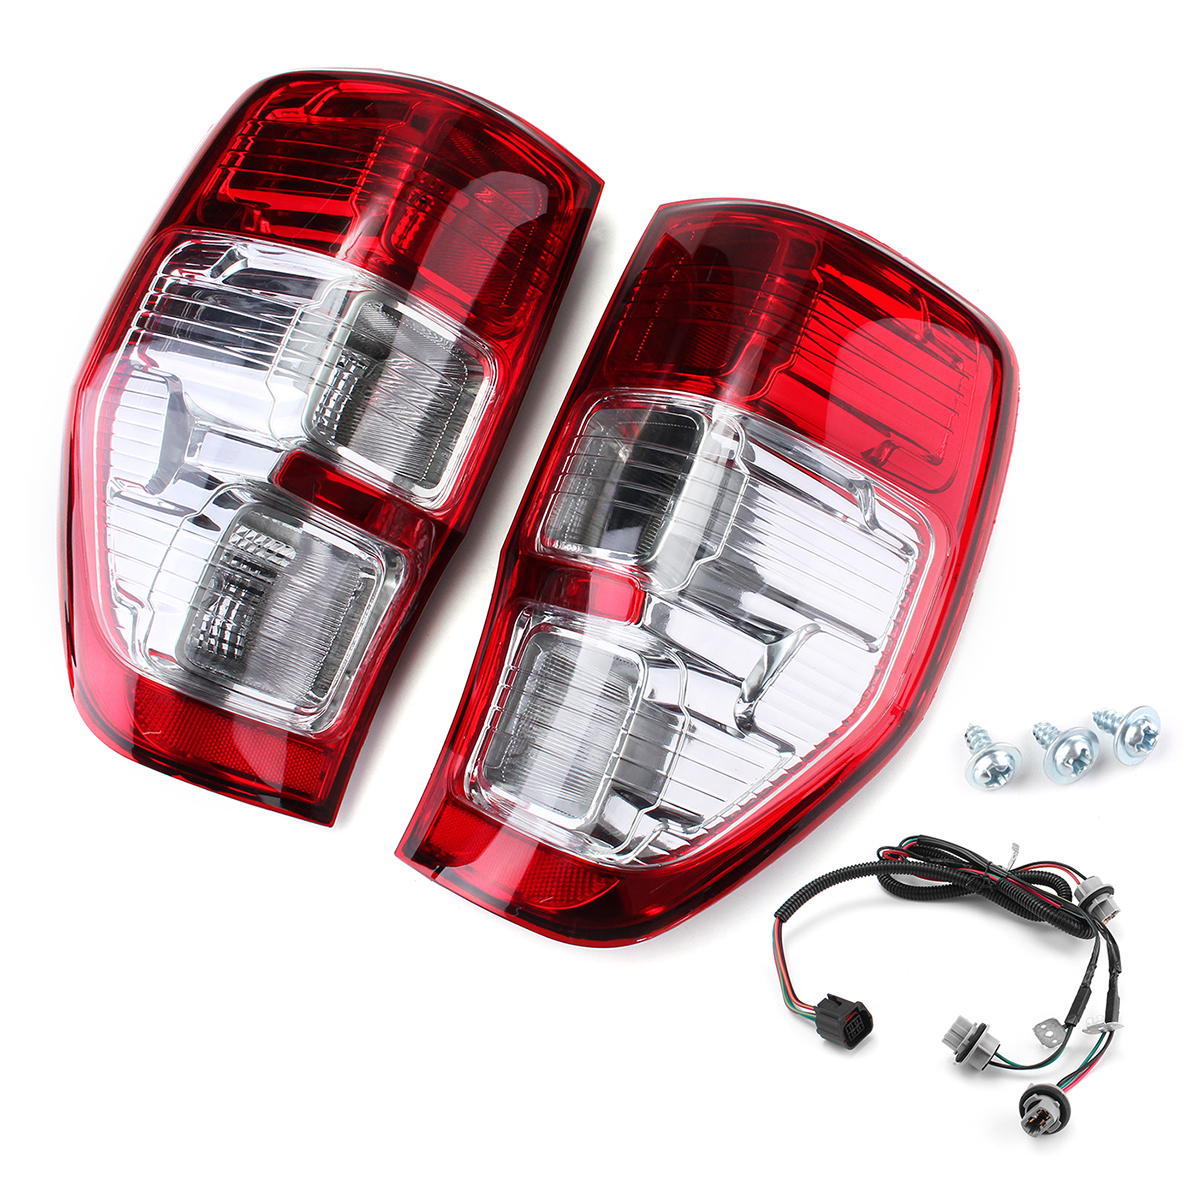 

Car Rear Tail Light Assembly Brake Lamp with Wiring Harness for Ford Ranger Ute PX XL XLS XLT 2011-2018